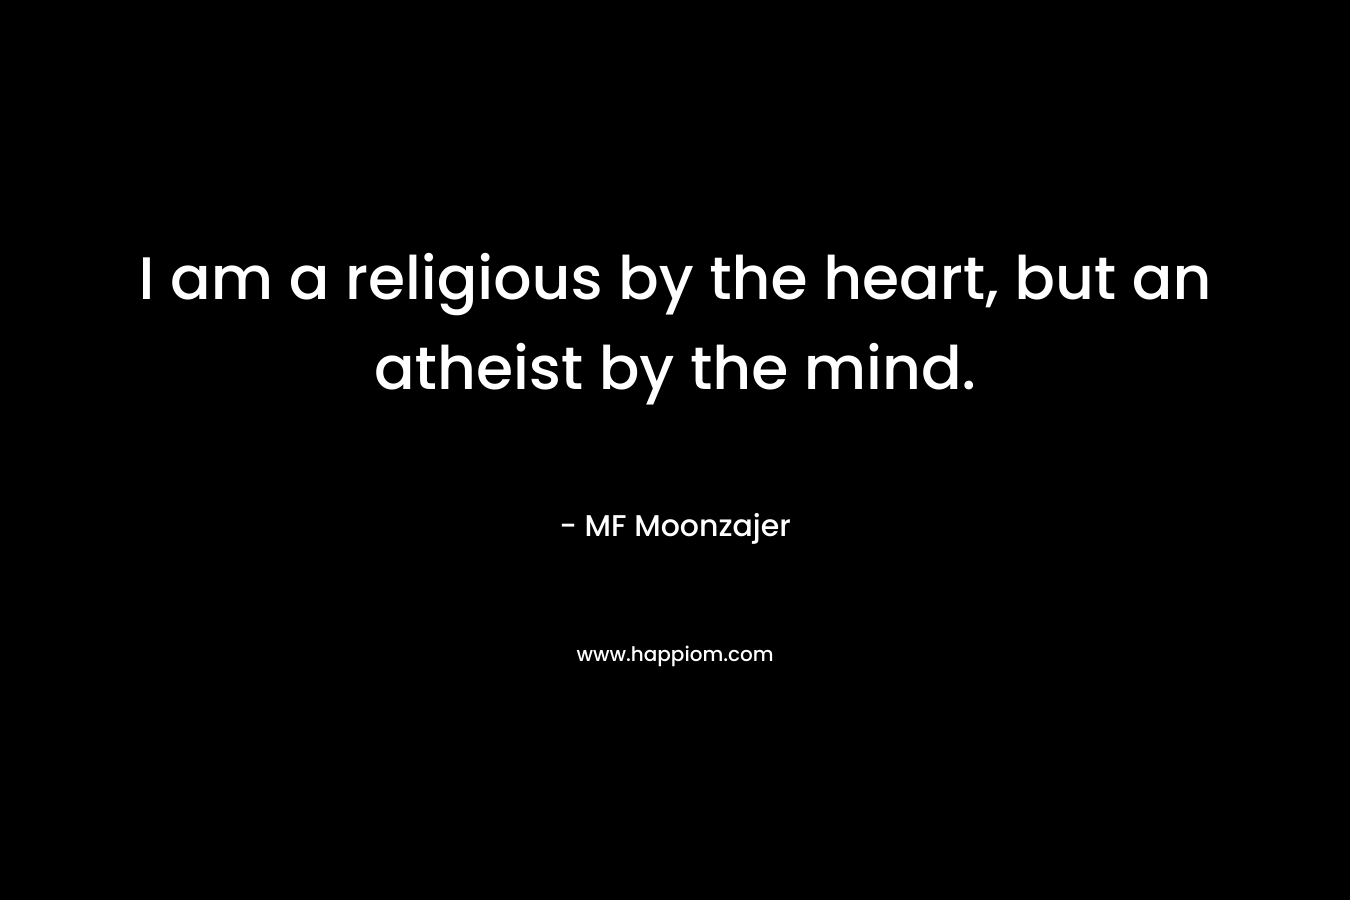 I am a religious by the heart, but an atheist by the mind.